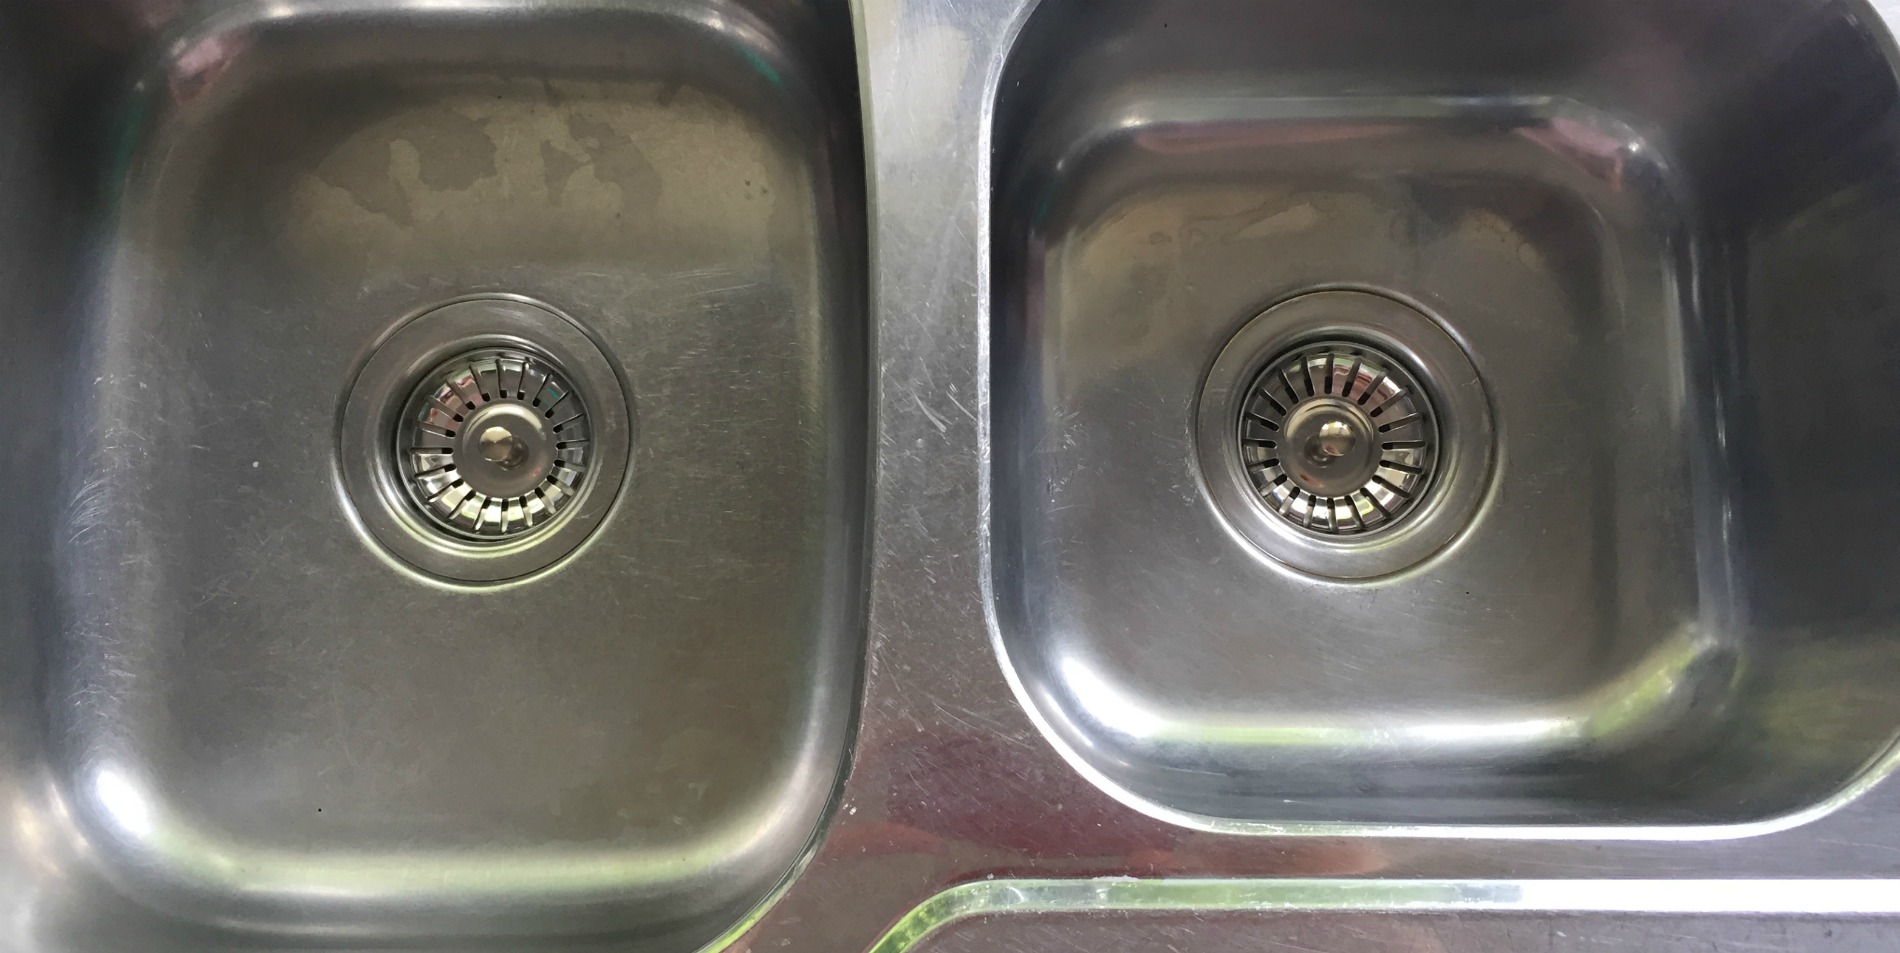 How to Replace a Kitchen Sink Basket Strainer (DIY)